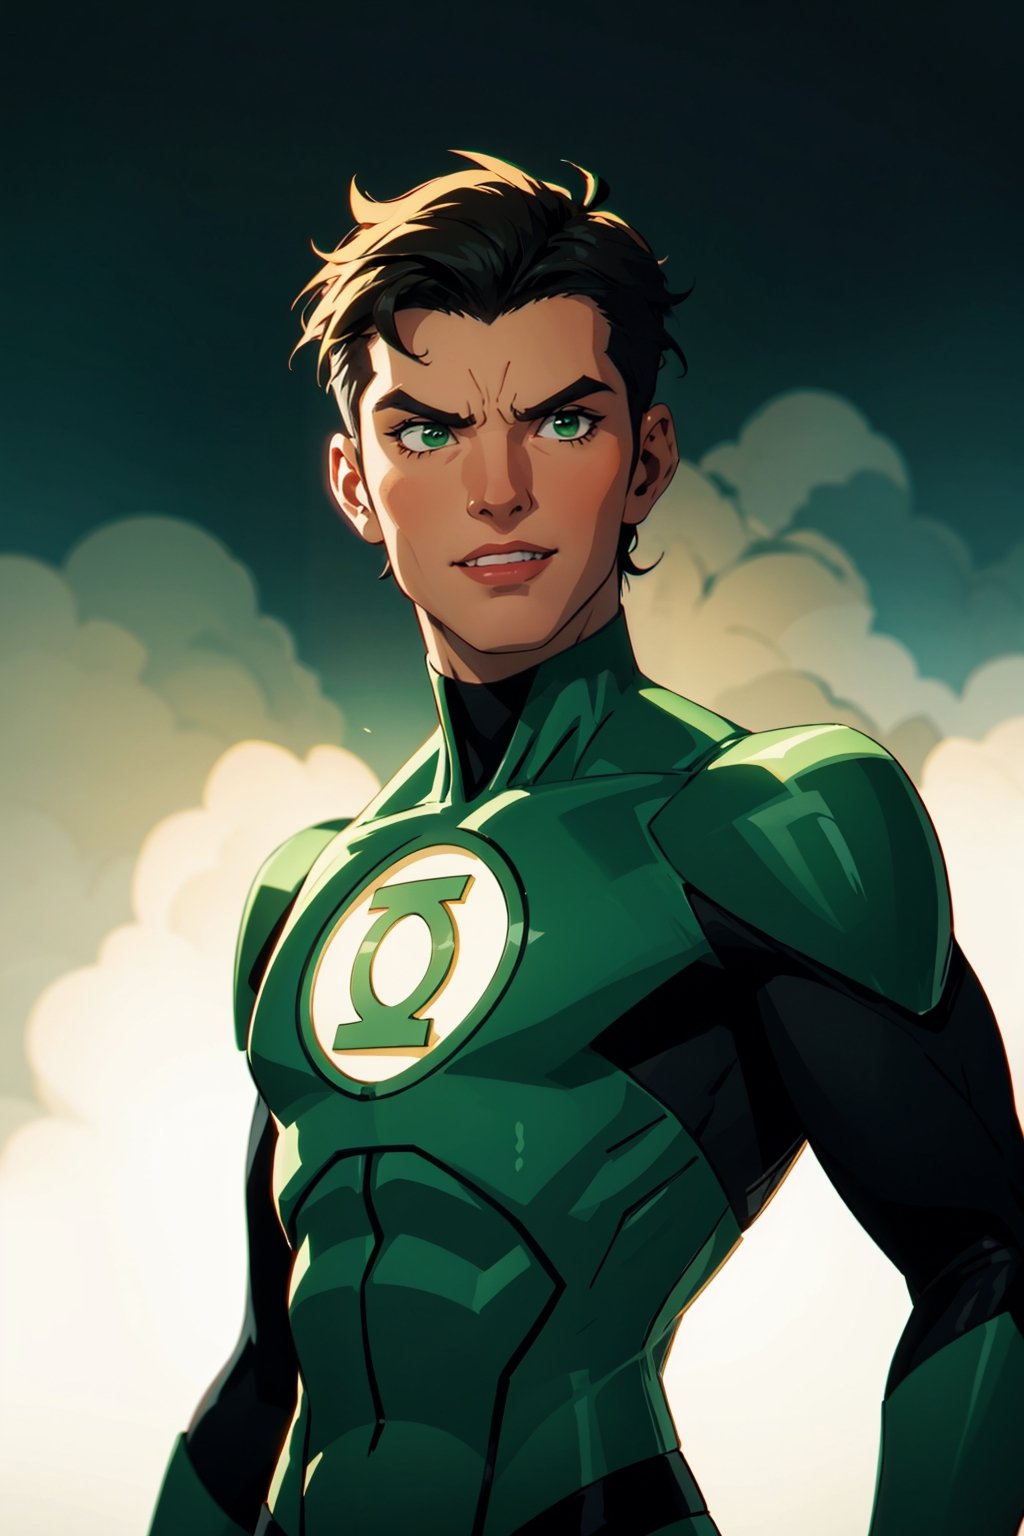 (1 man:1.4),uniform_green lantern_DCcomics:1,hal jordan, solo, upper body,(masterpiece:1.4),(best quality:1.4),dramatic shadows,extremely_beautiful_detailed_anime_face_and_eyes,an extremely delicate and beautiful,dynamic angle, cinematic camera, dynamic pose,depth of field,chromatic aberration,backlighting,Watercolor, Ink, epic, candystyle,chibi style,cute,happy,vibrant,colorful,nature,pop,